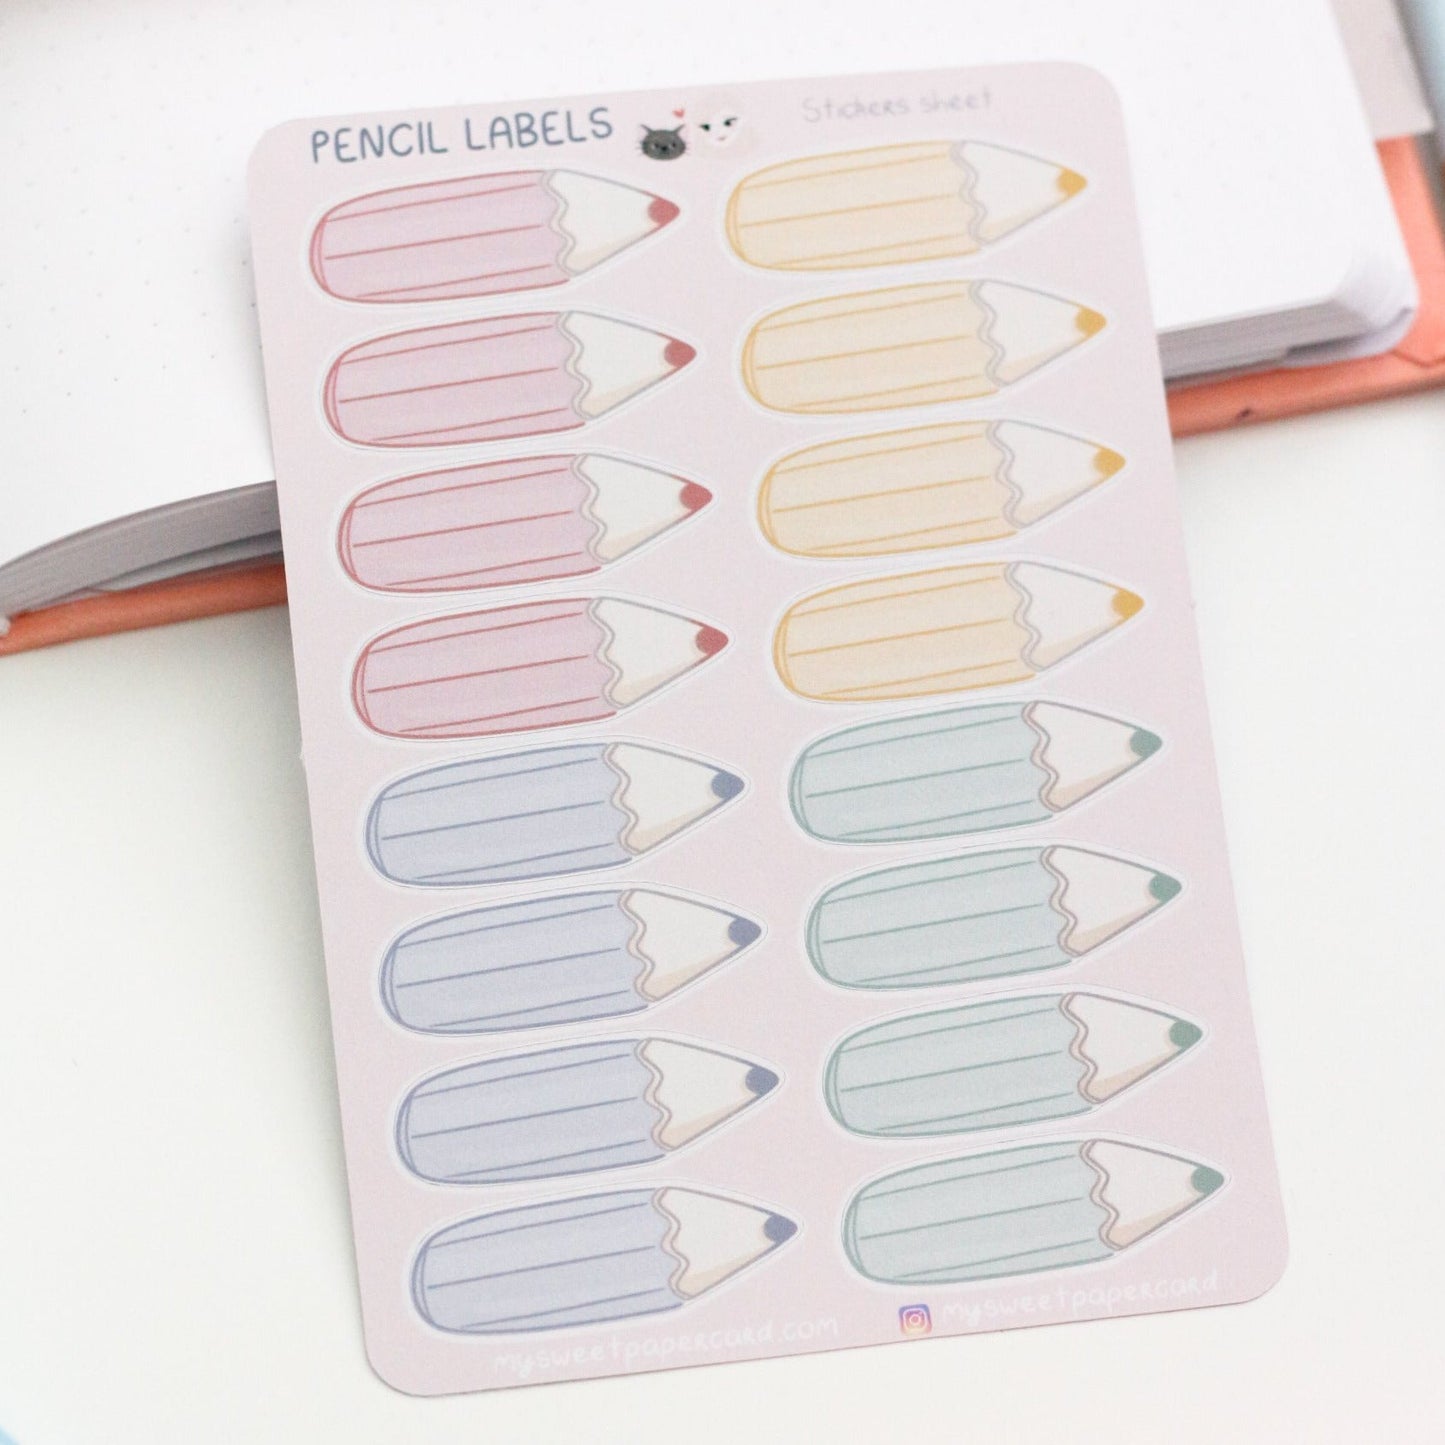 2ND SALE - Pastel pencil stickers - Name labels for school supplies - Back to school stickers